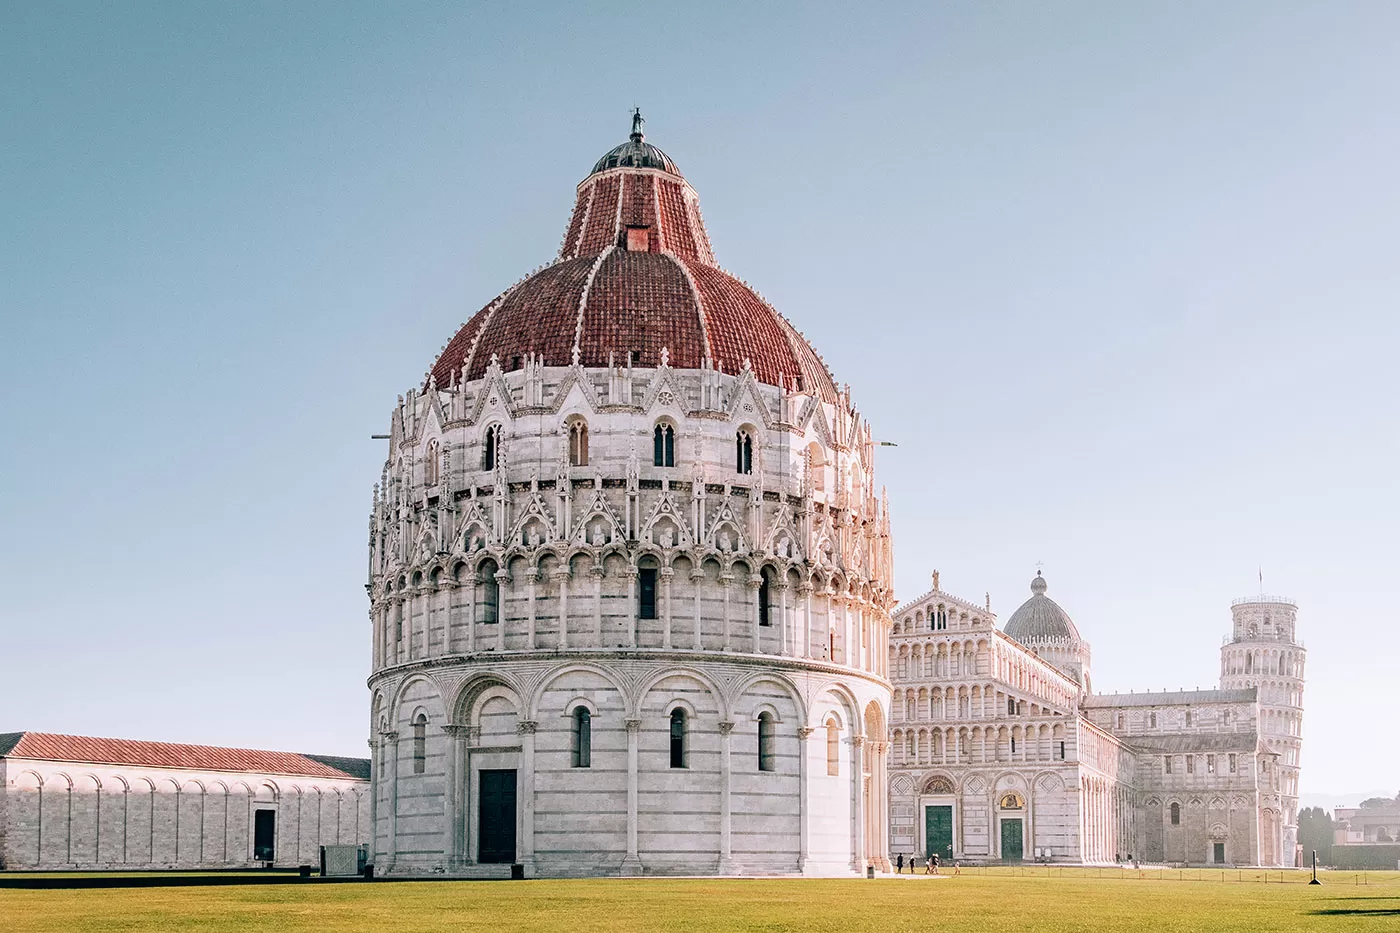 Florence tips - Day trip to Pisa - Campo dei Miracoli - Baptistery